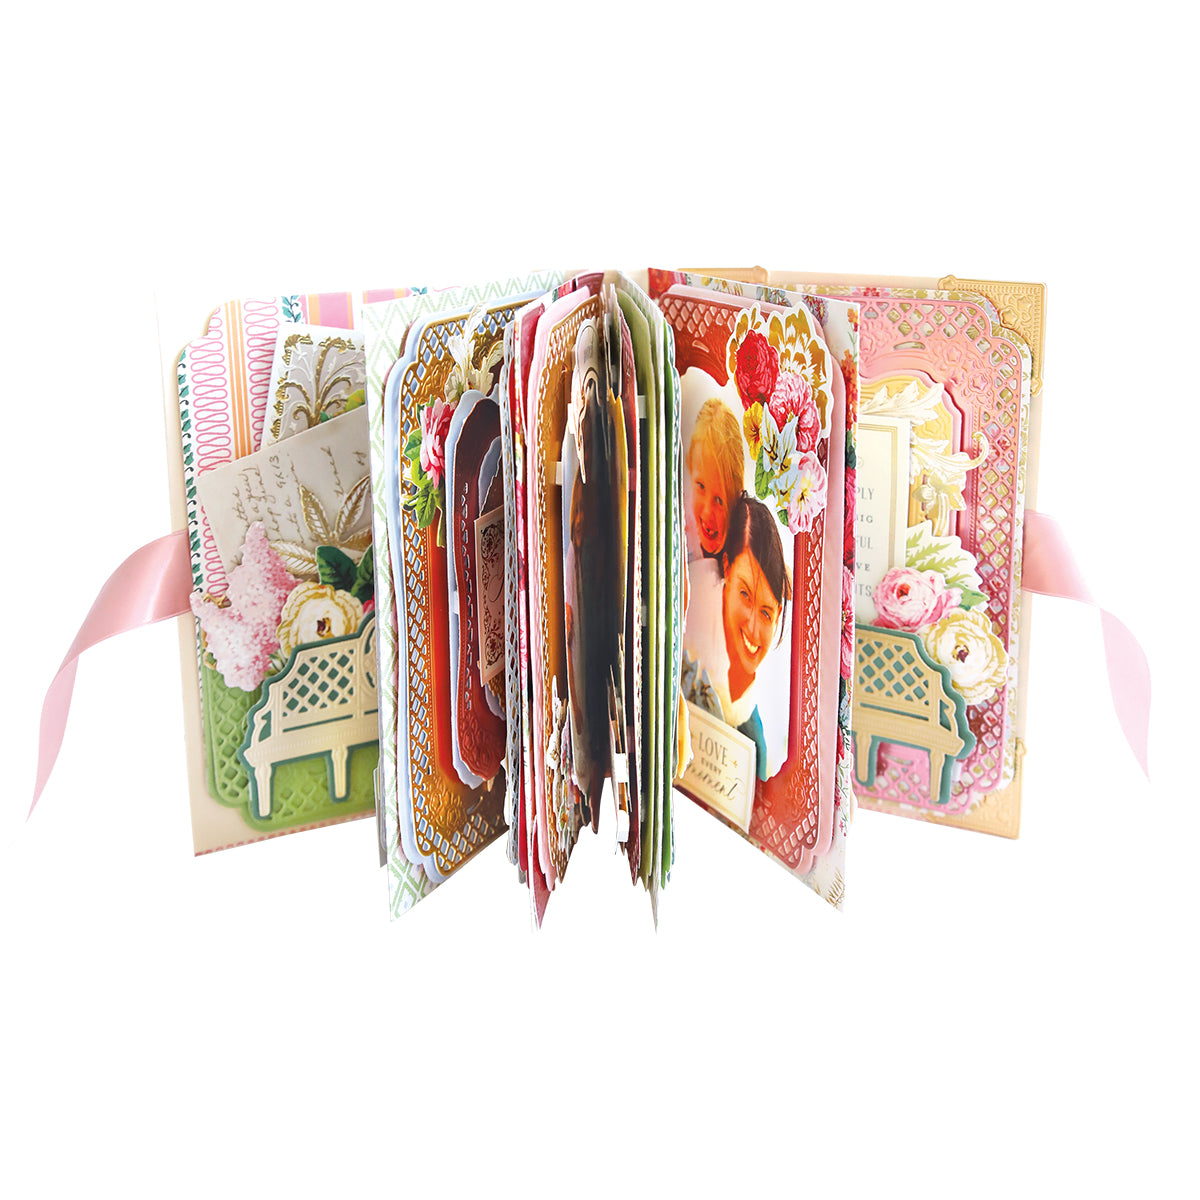 An open book with pictures and ribbons, perfect for preserving cherished memories using Anna Griffin's Trellis Album Class Materials and Dies.